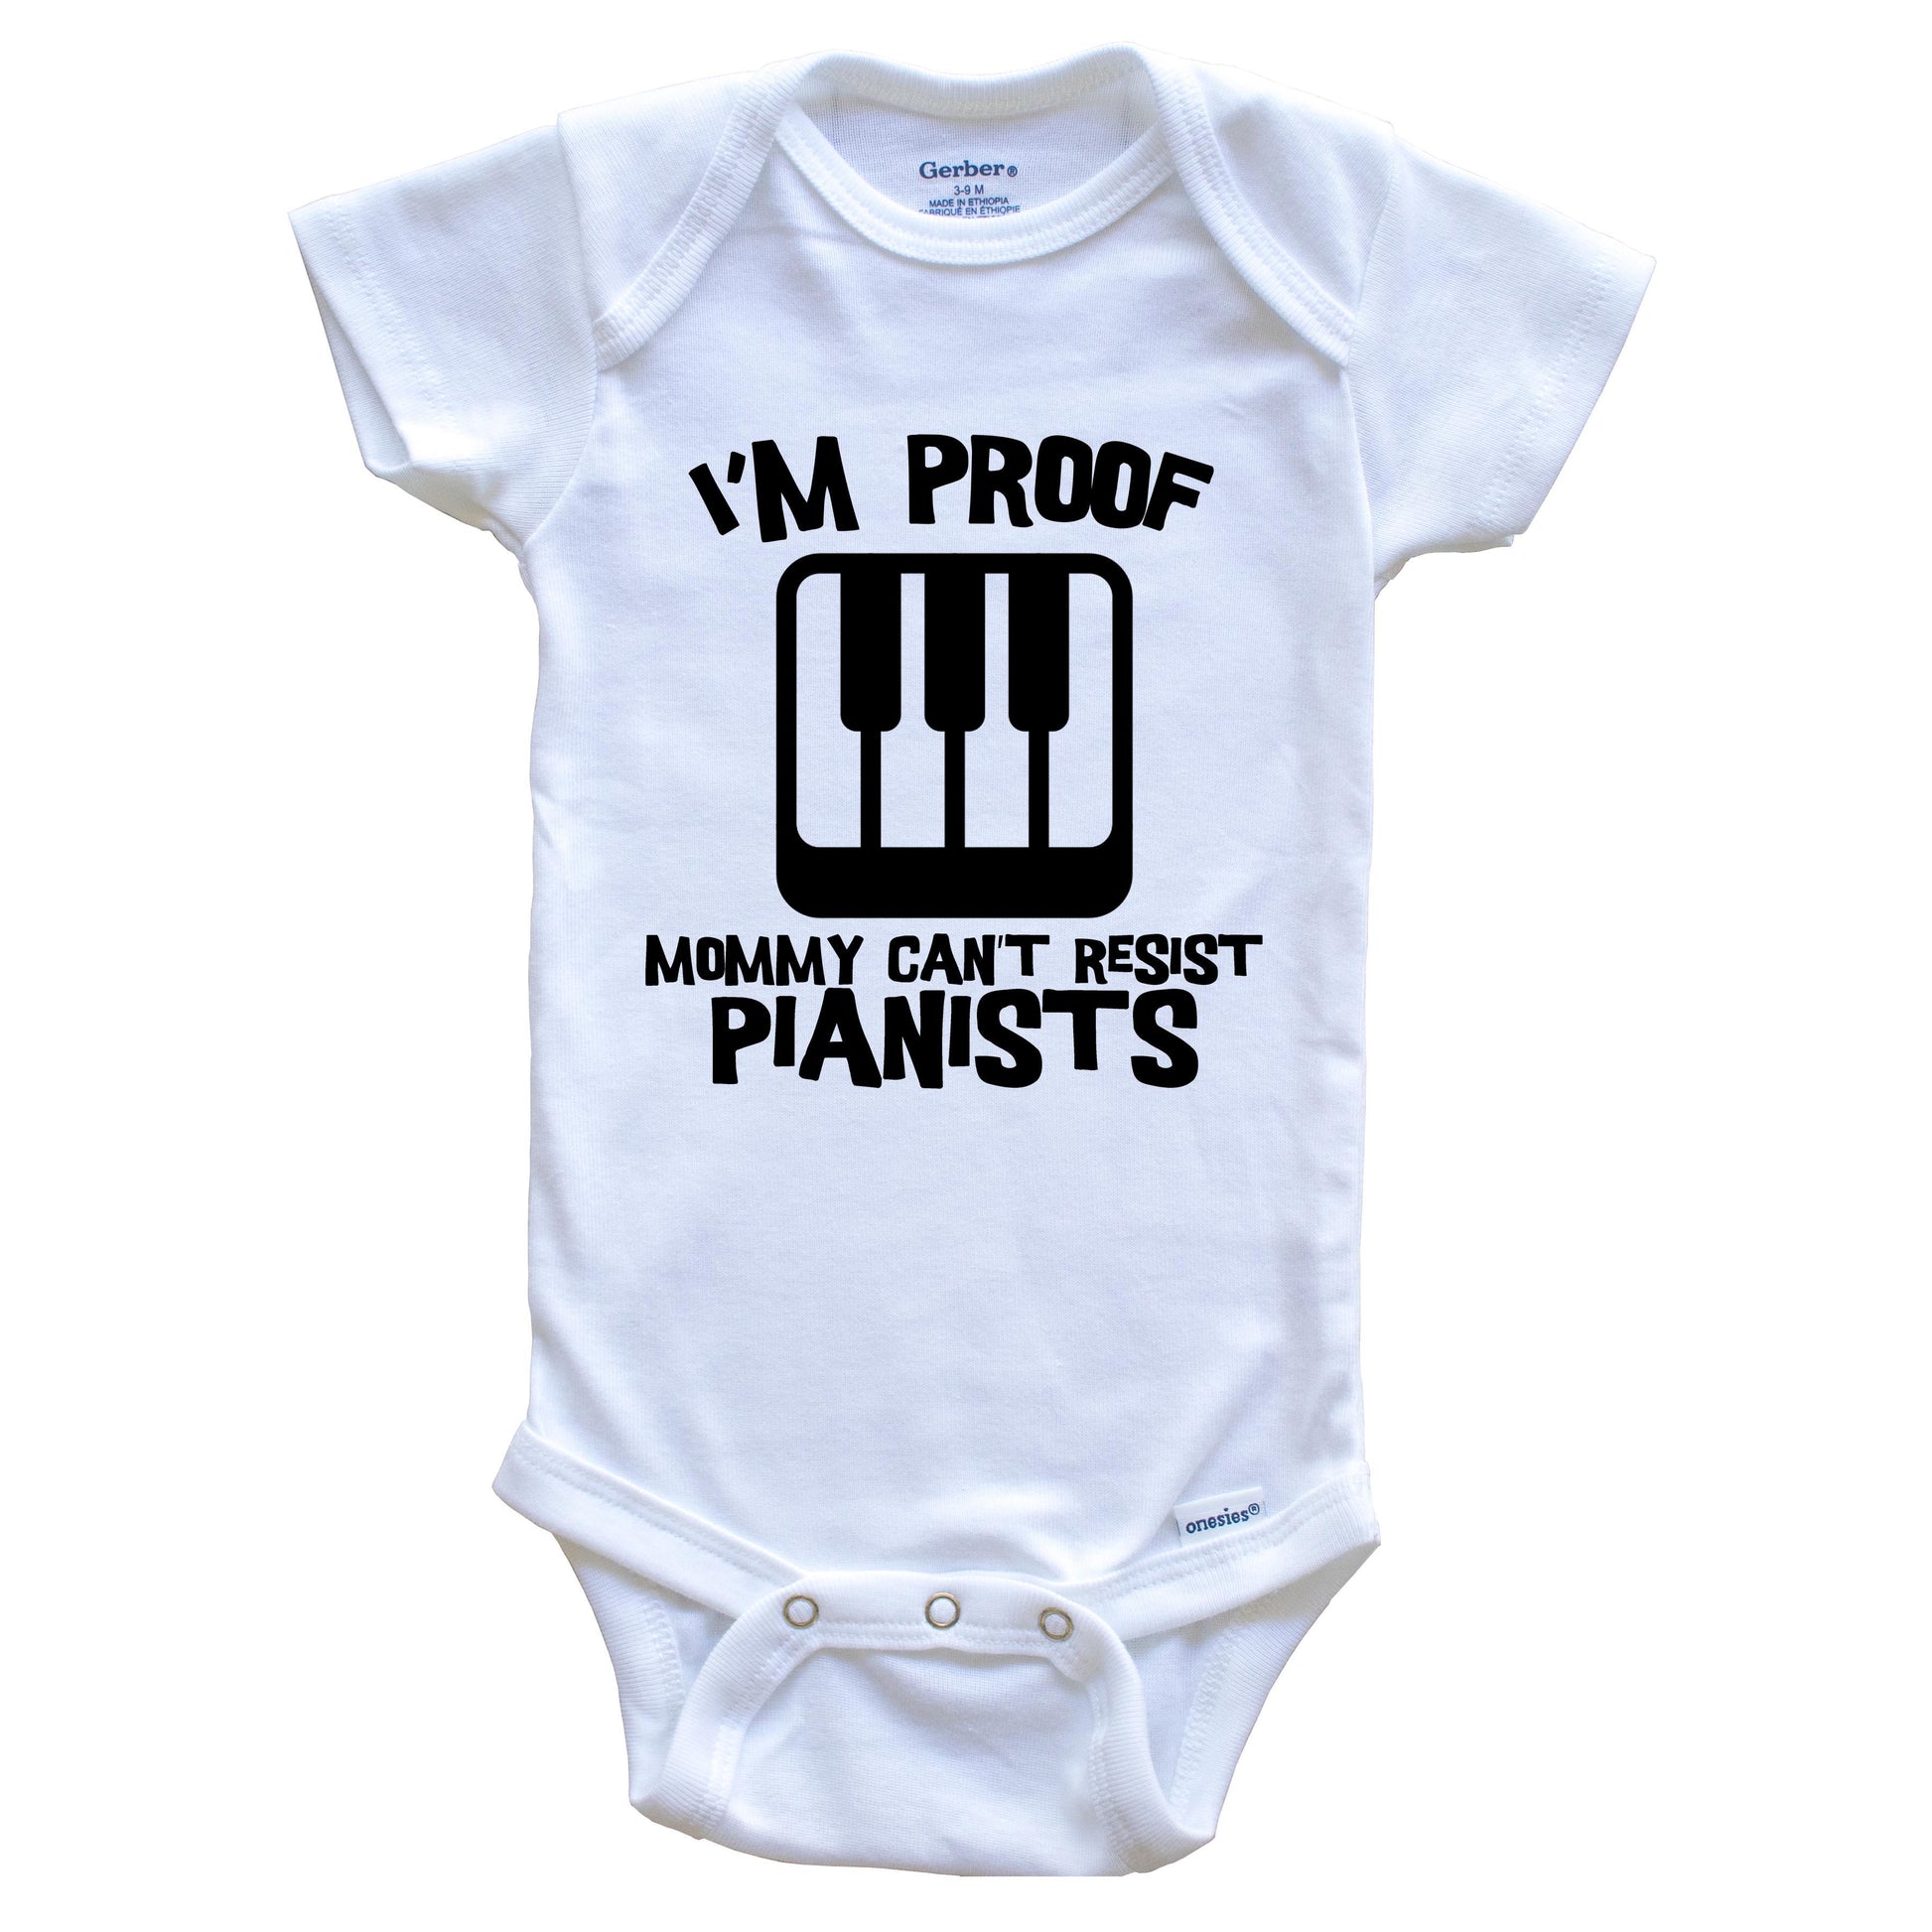 I'm Proof Mommy Can't Resist Pianists Funny Piano Baby Onesie